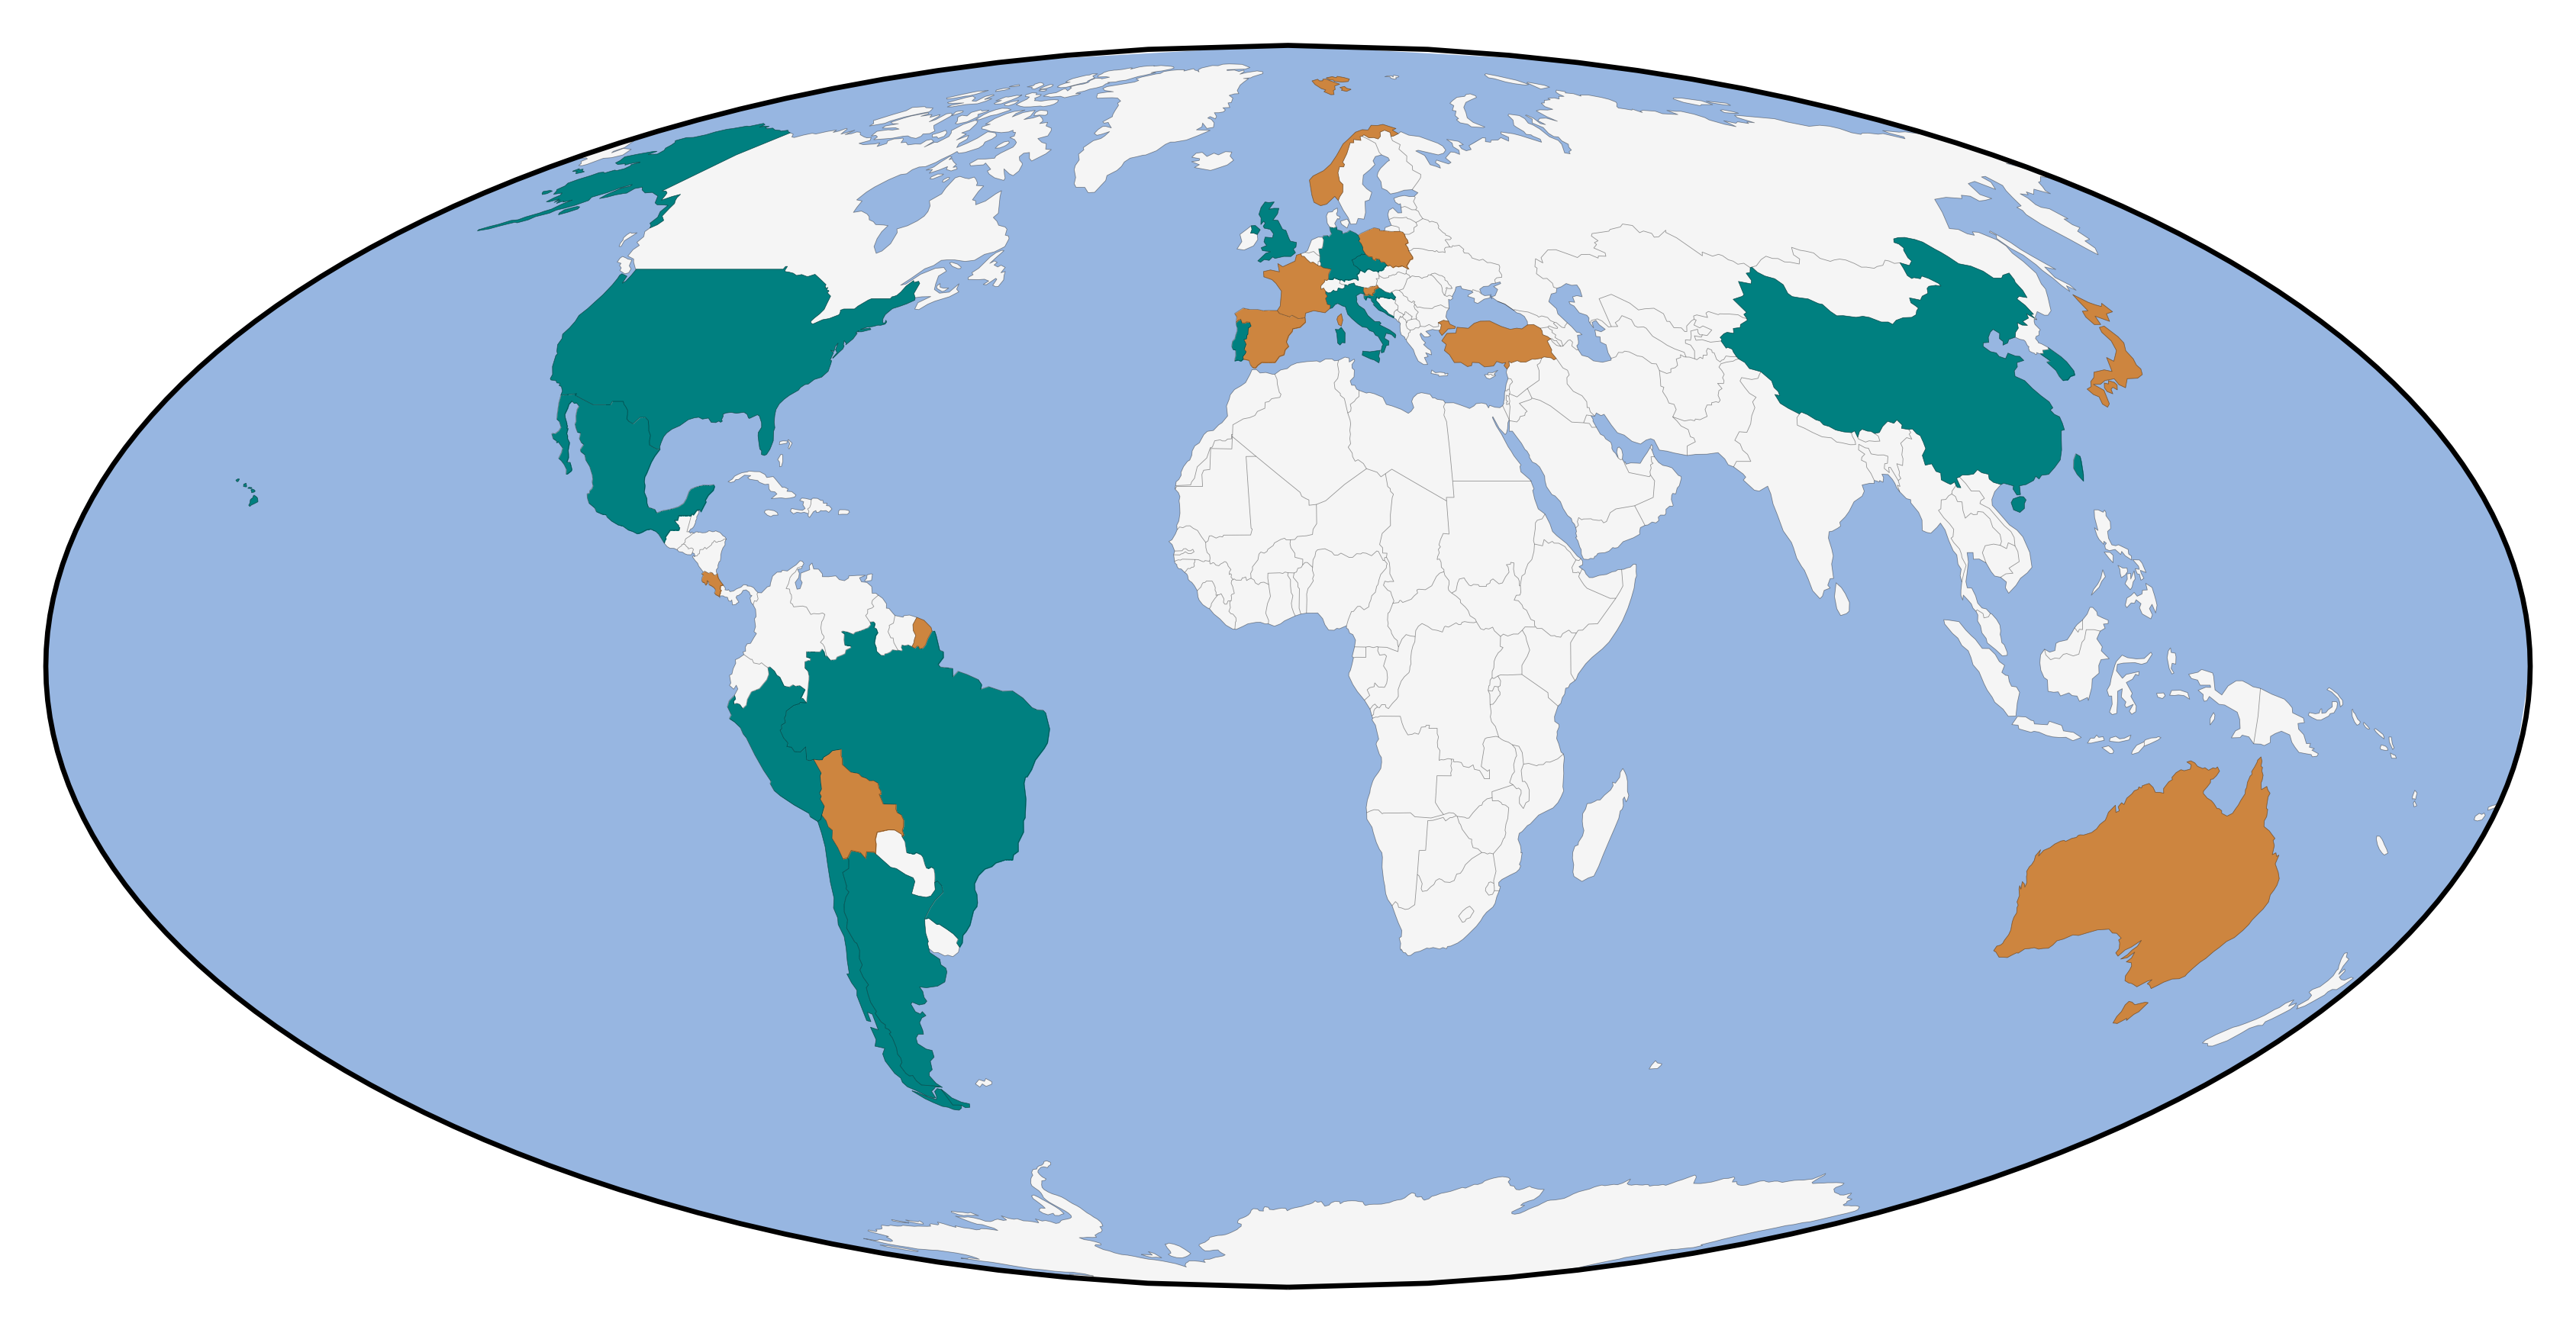 countries involved in SWGO